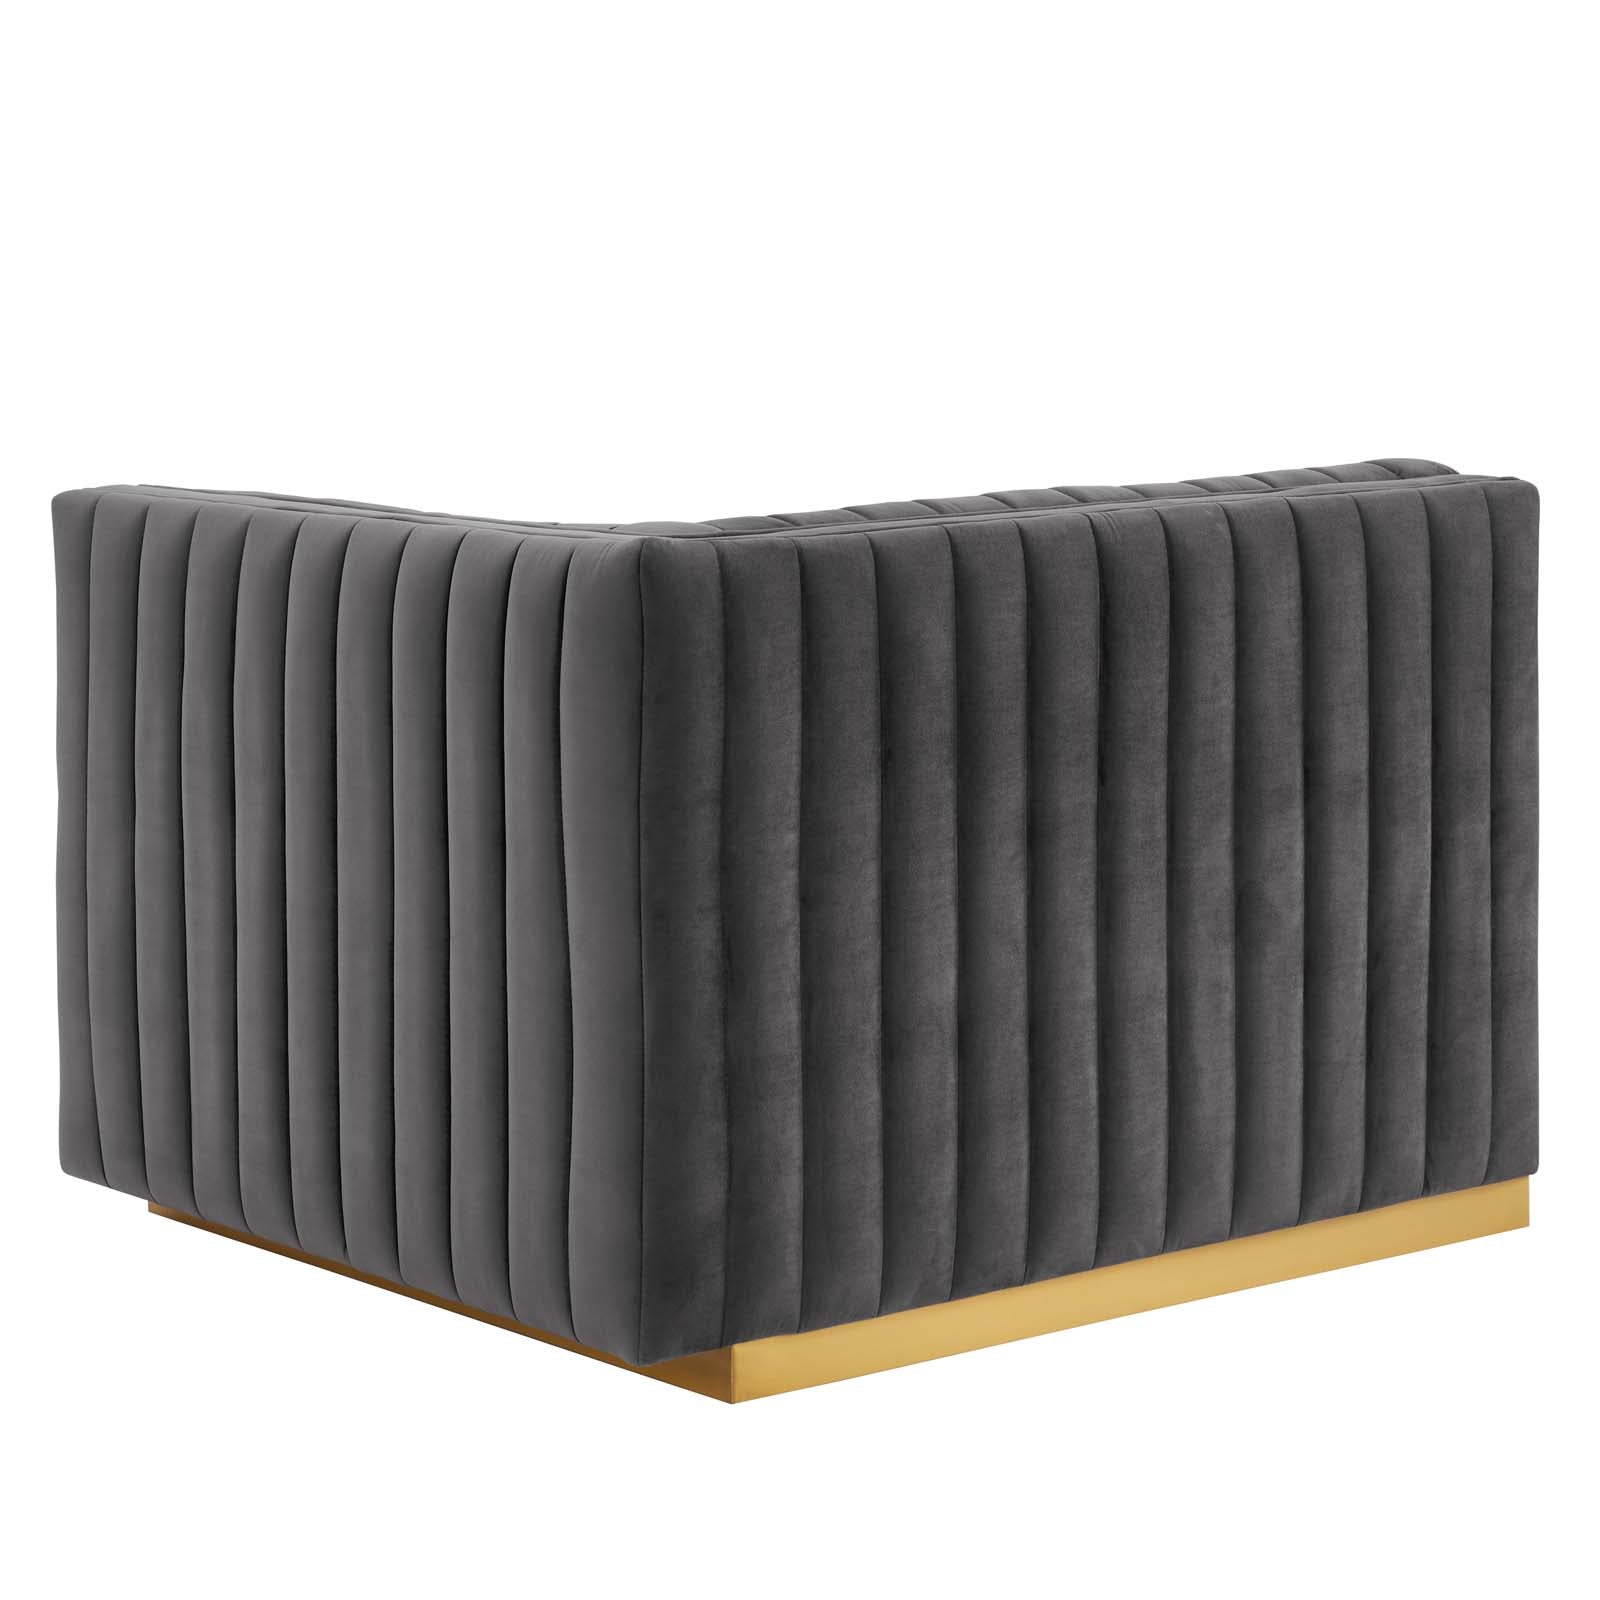 Conjure Channel Tufted Performance Velvet Right-Arm Chair - East Shore Modern Home Furnishings